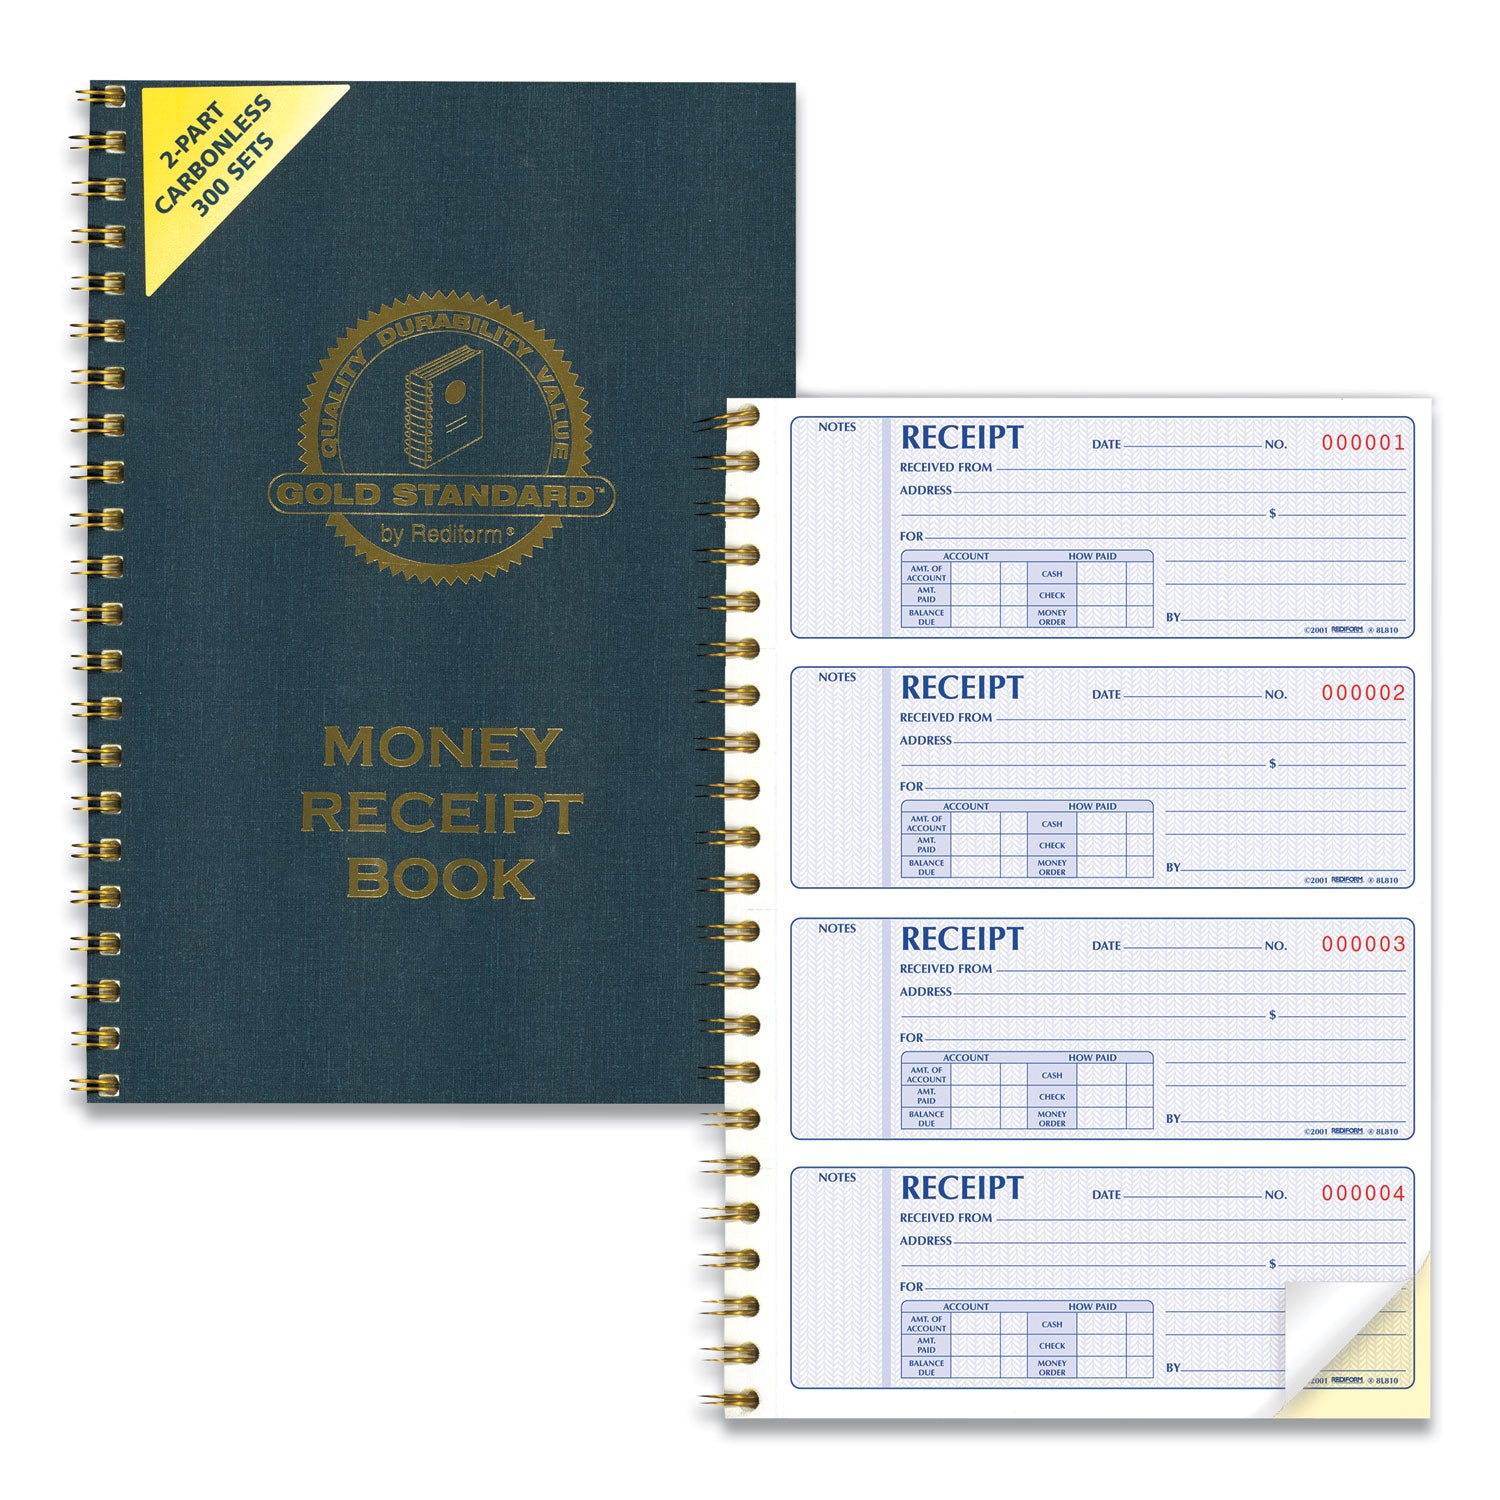 Gold Standard Money Receipt Book, Two-Part Carbonless, 7 x 2.75, 4 Forms/Sheet, 300 Forms Total - 